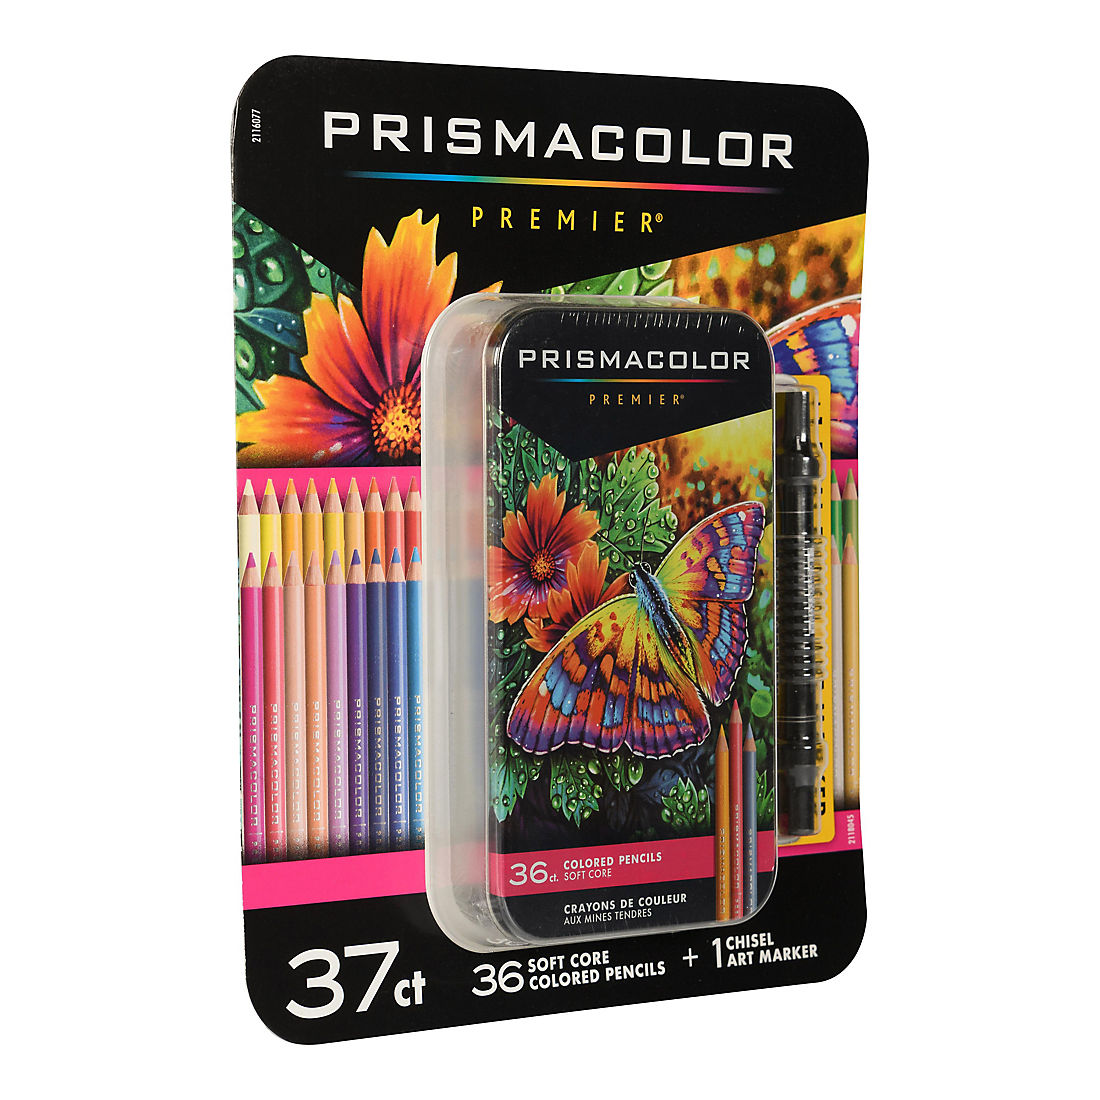 ArtSkills Brush Markers for Kids, Dual Tip Markers for Adult Coloring &  Drawing, 8-Count 